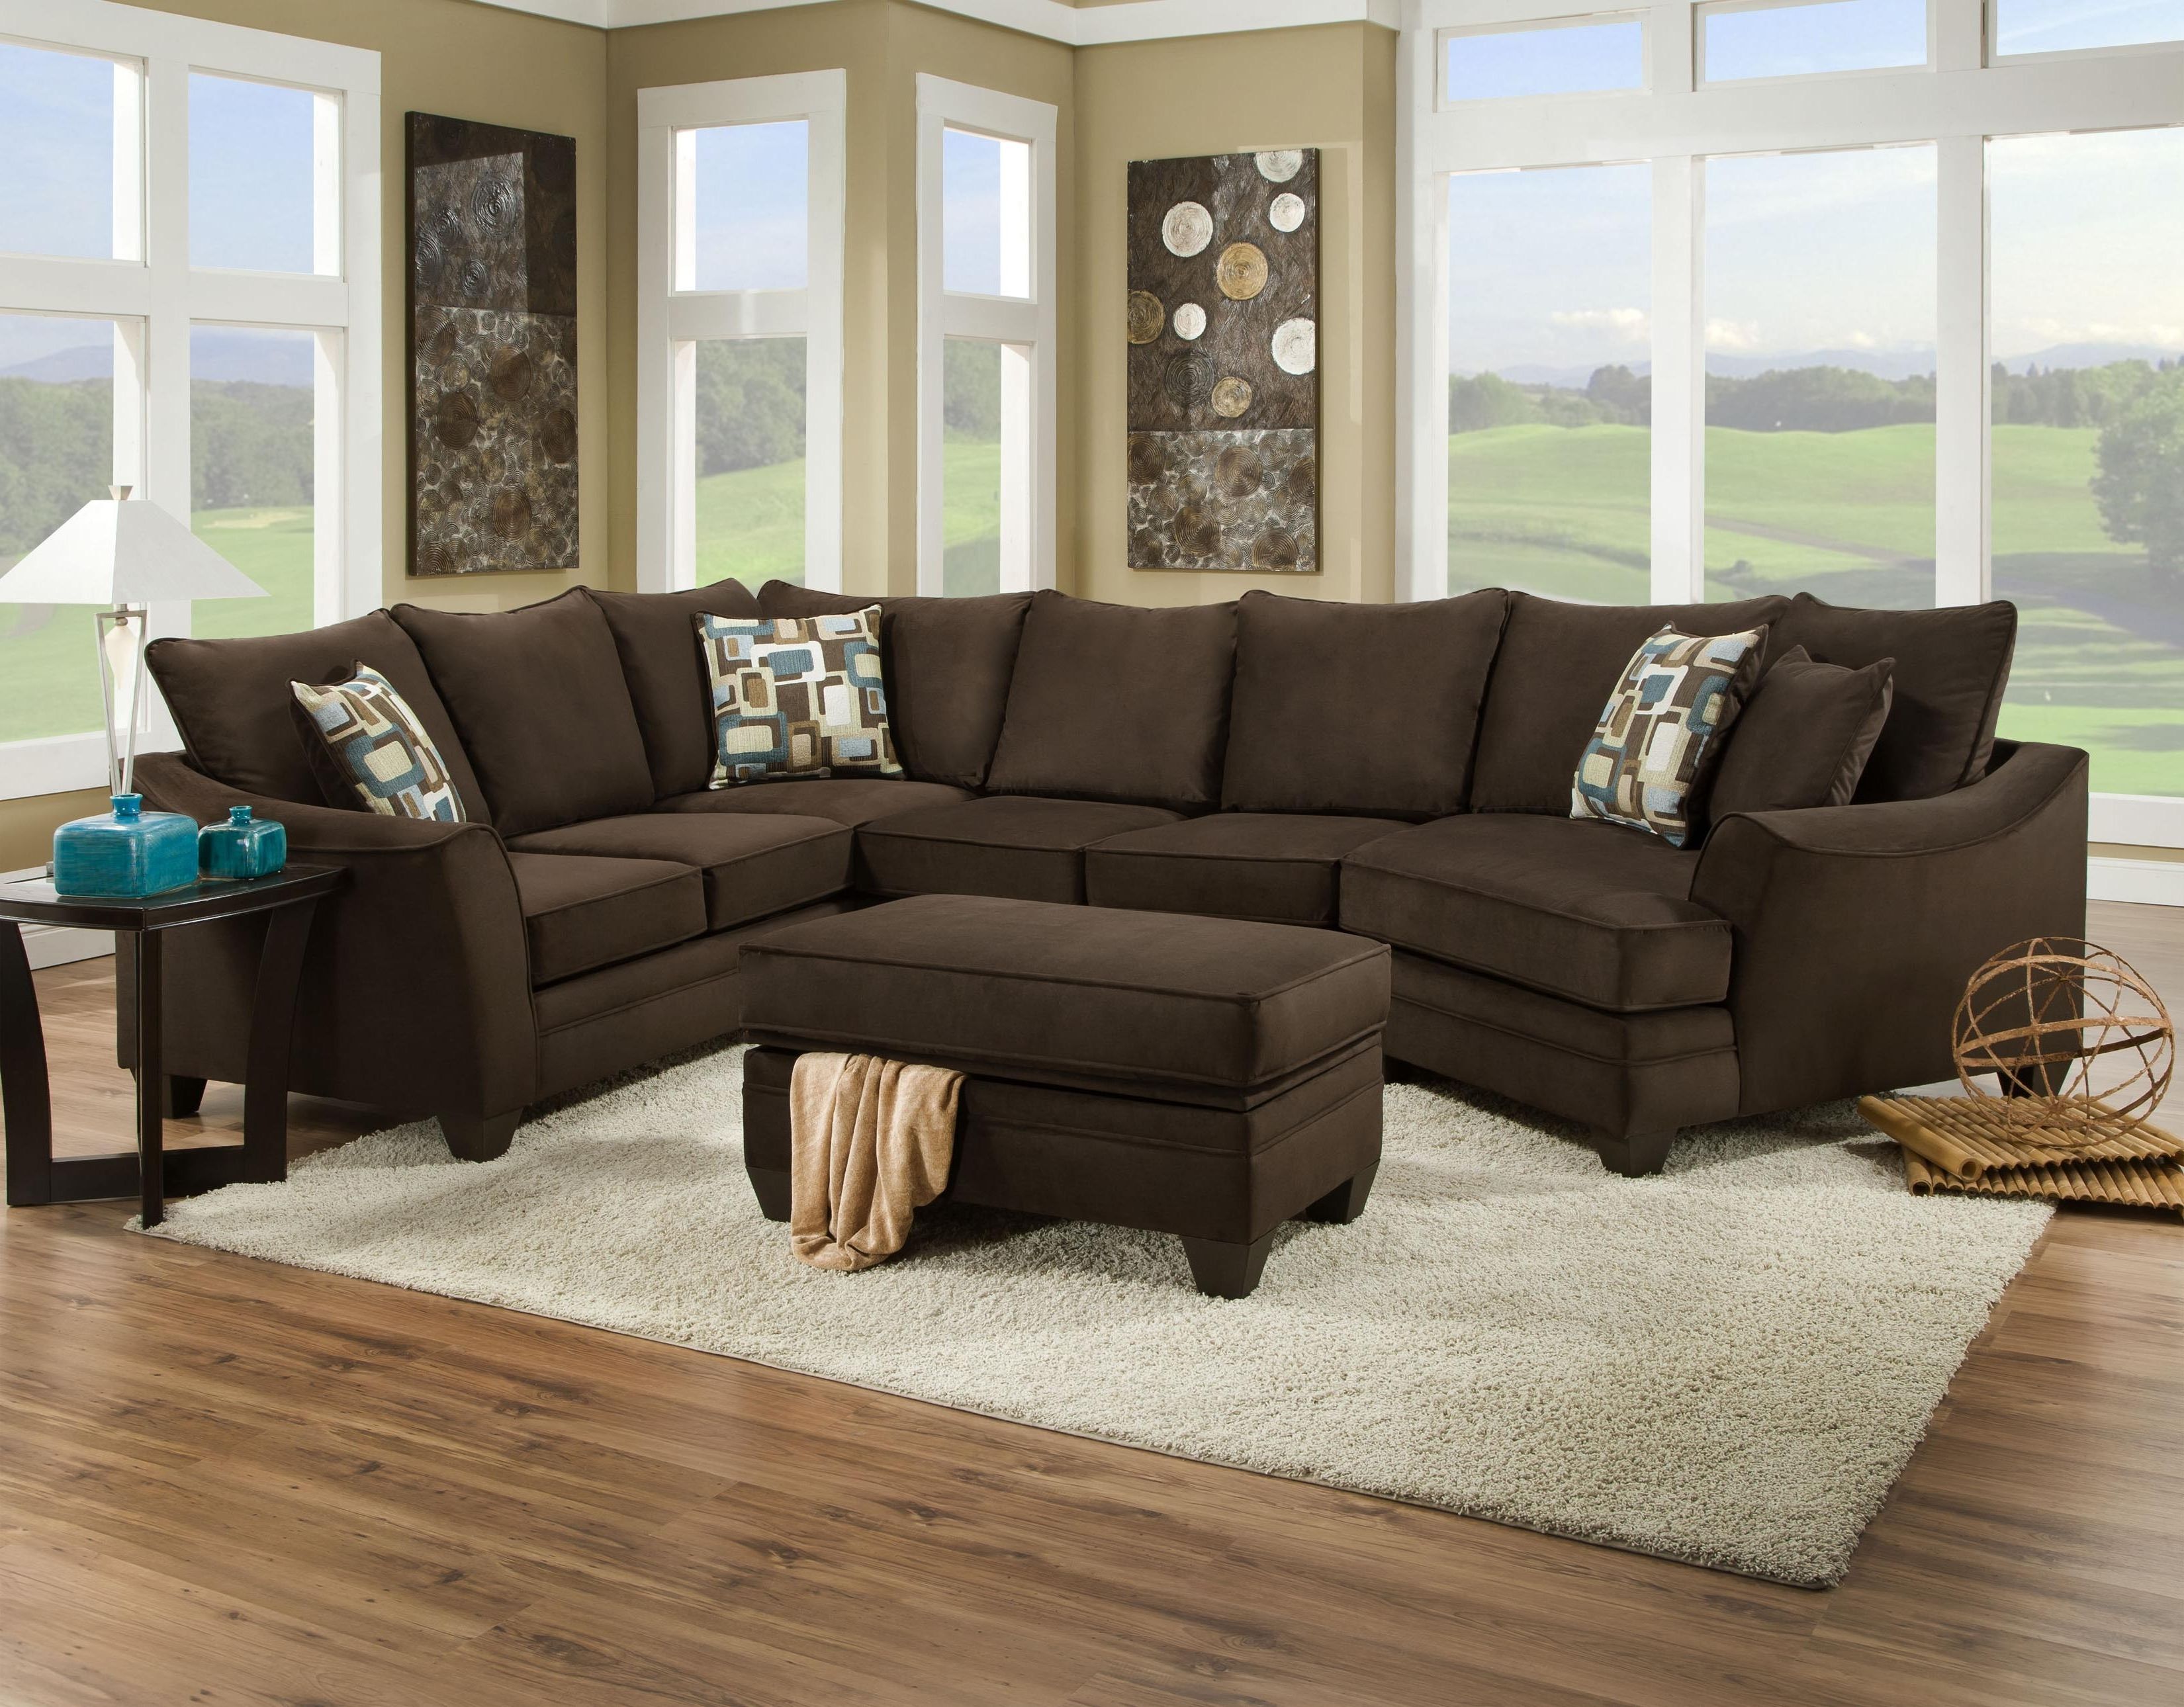 American Furniture 3810 Sectional Sofa That Seats 5 With Left Side Regarding Most Recent Jacksonville Nc Sectional Sofas (View 13 of 20)